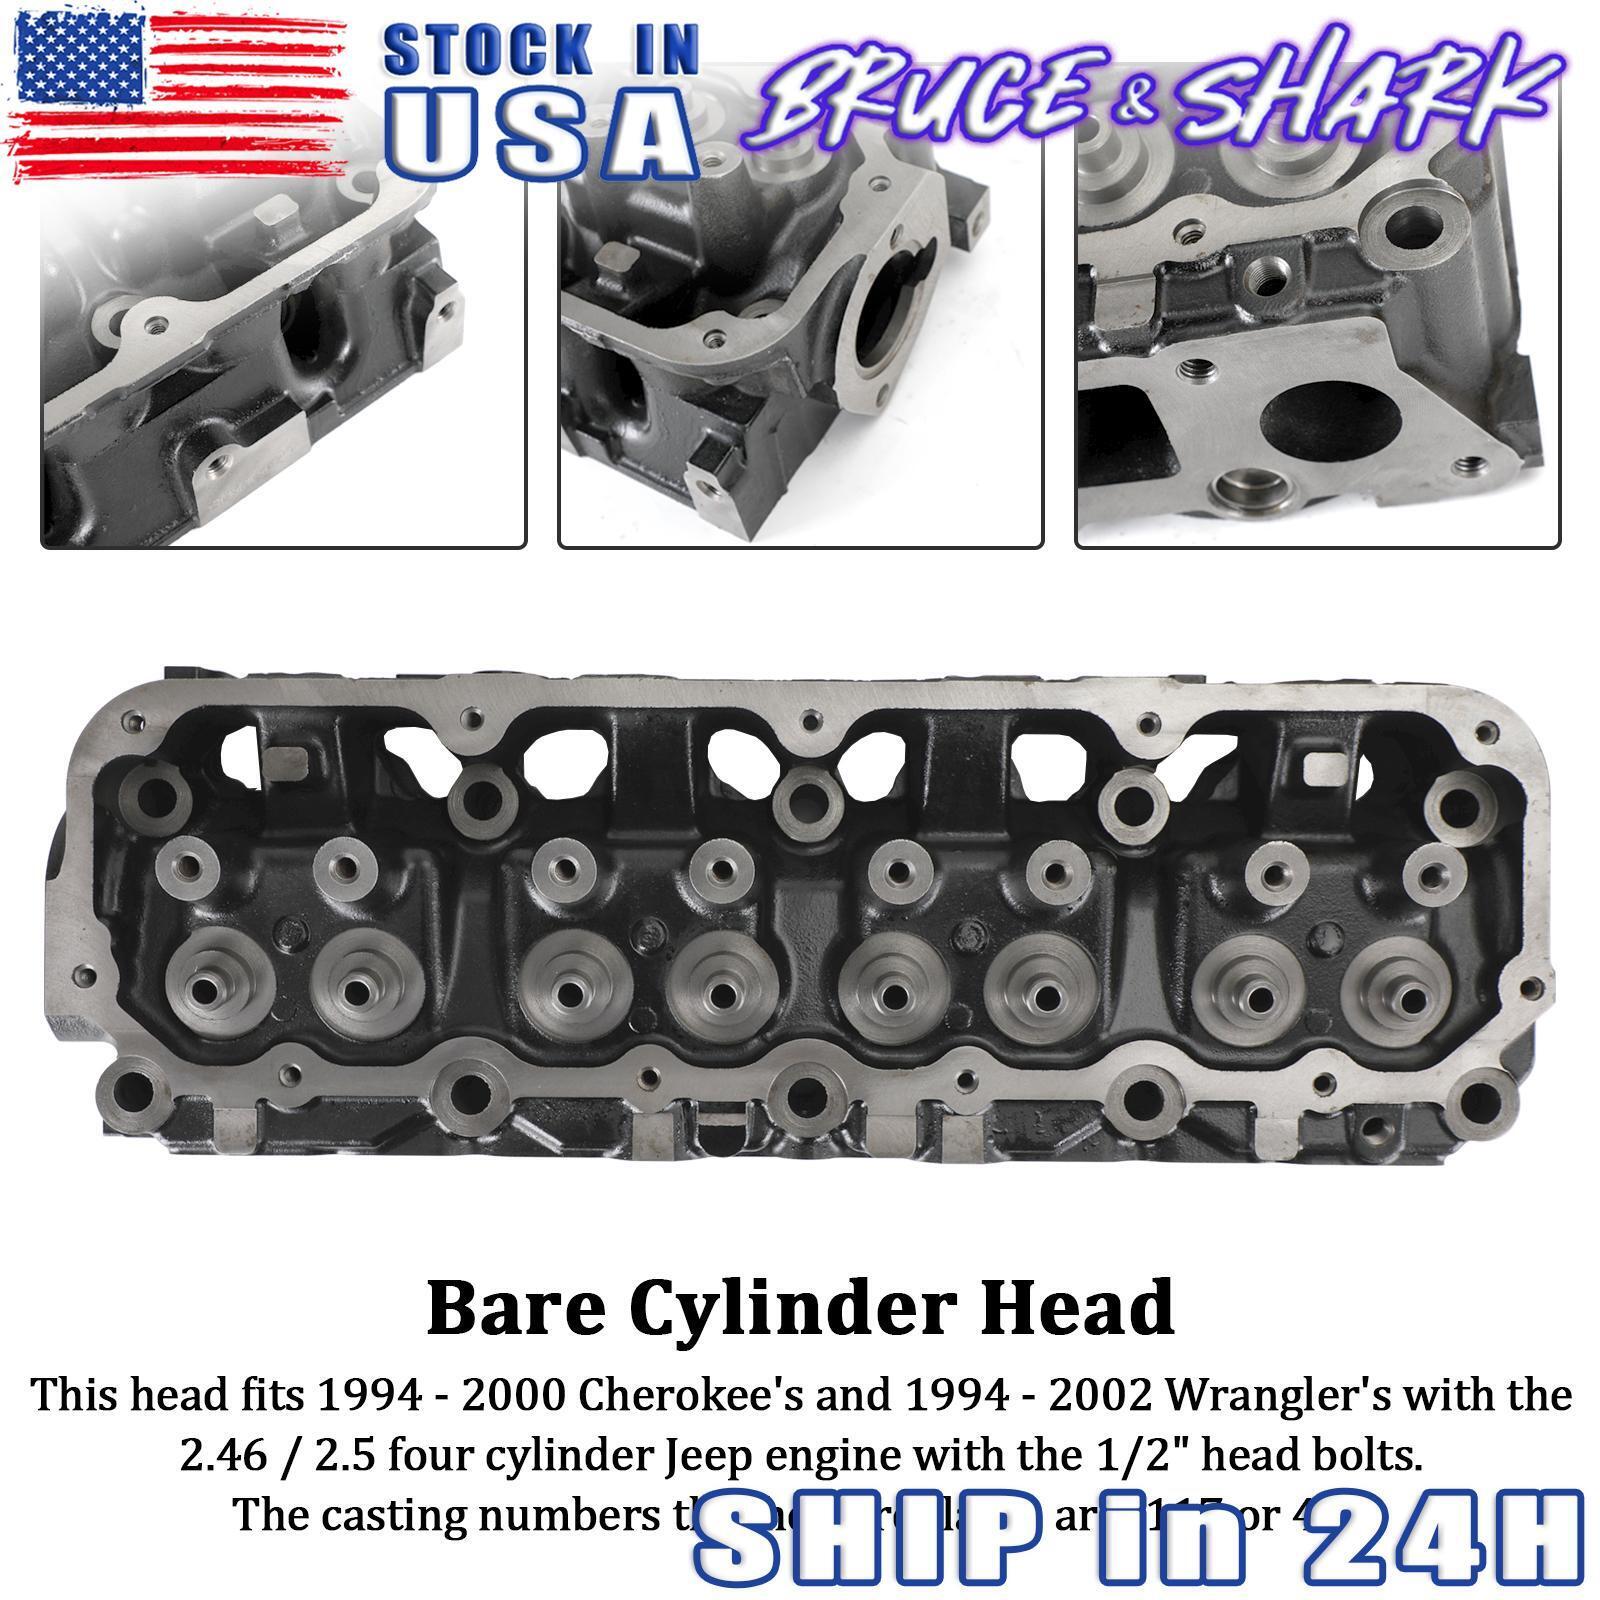 Bare Cylinder Head 403 / 117 For Jeep 2.5L 1989-2002 USA